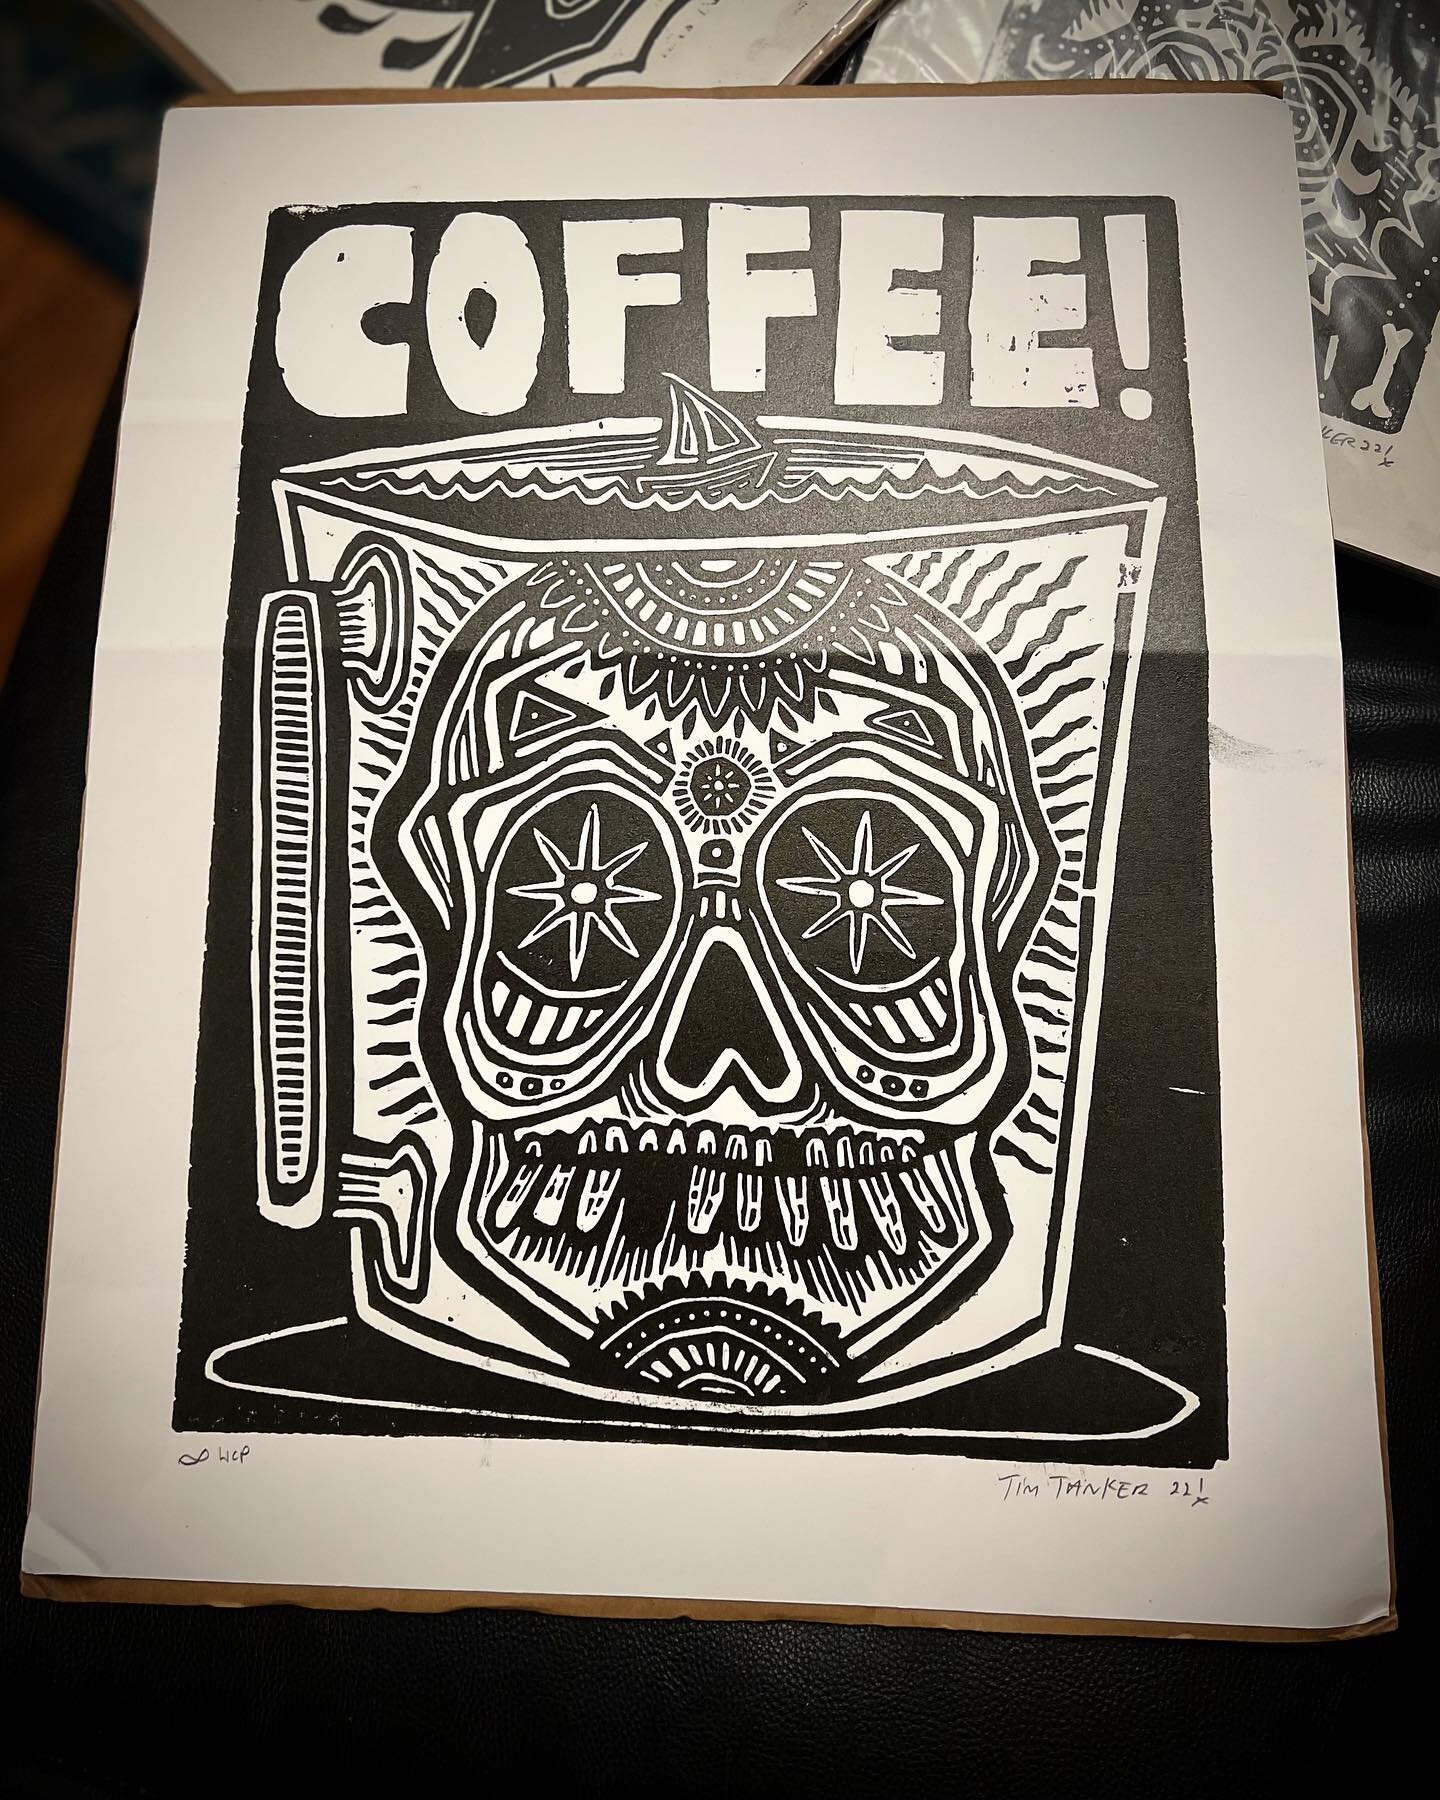 Got another rad wood cut print by my cousin @timmy_tanker